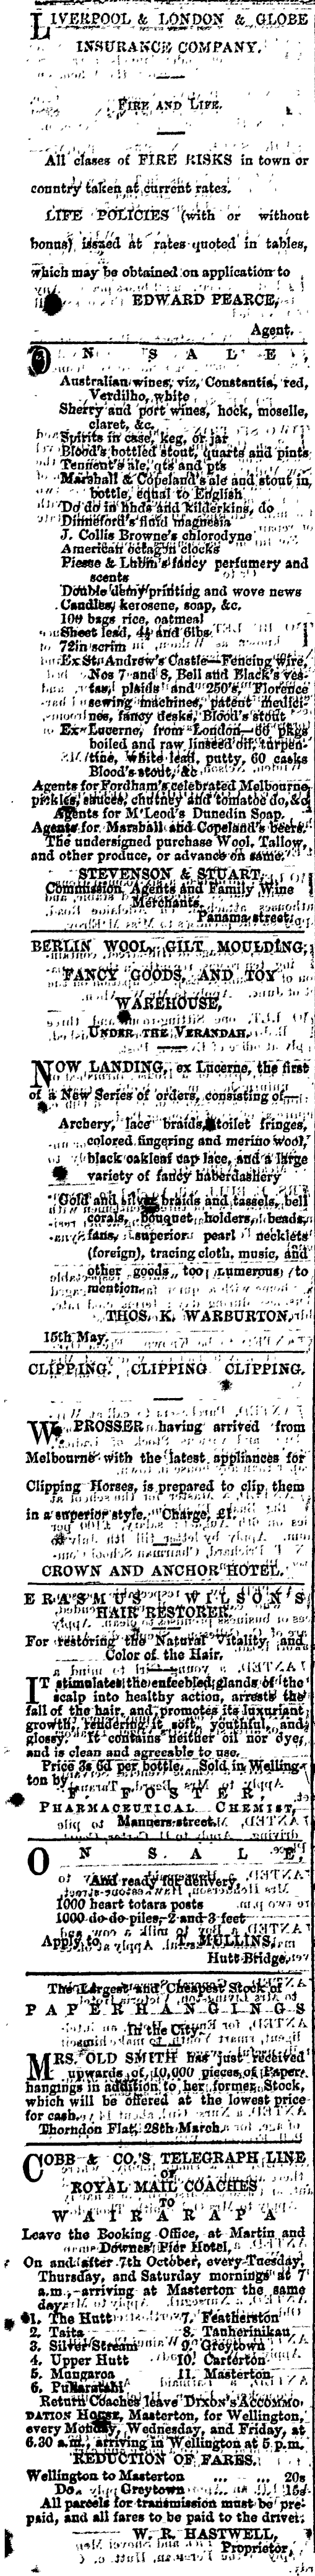 Papers Past Newspapers Evening Post 13 June 1873 Page 4 Advertisements Column 1